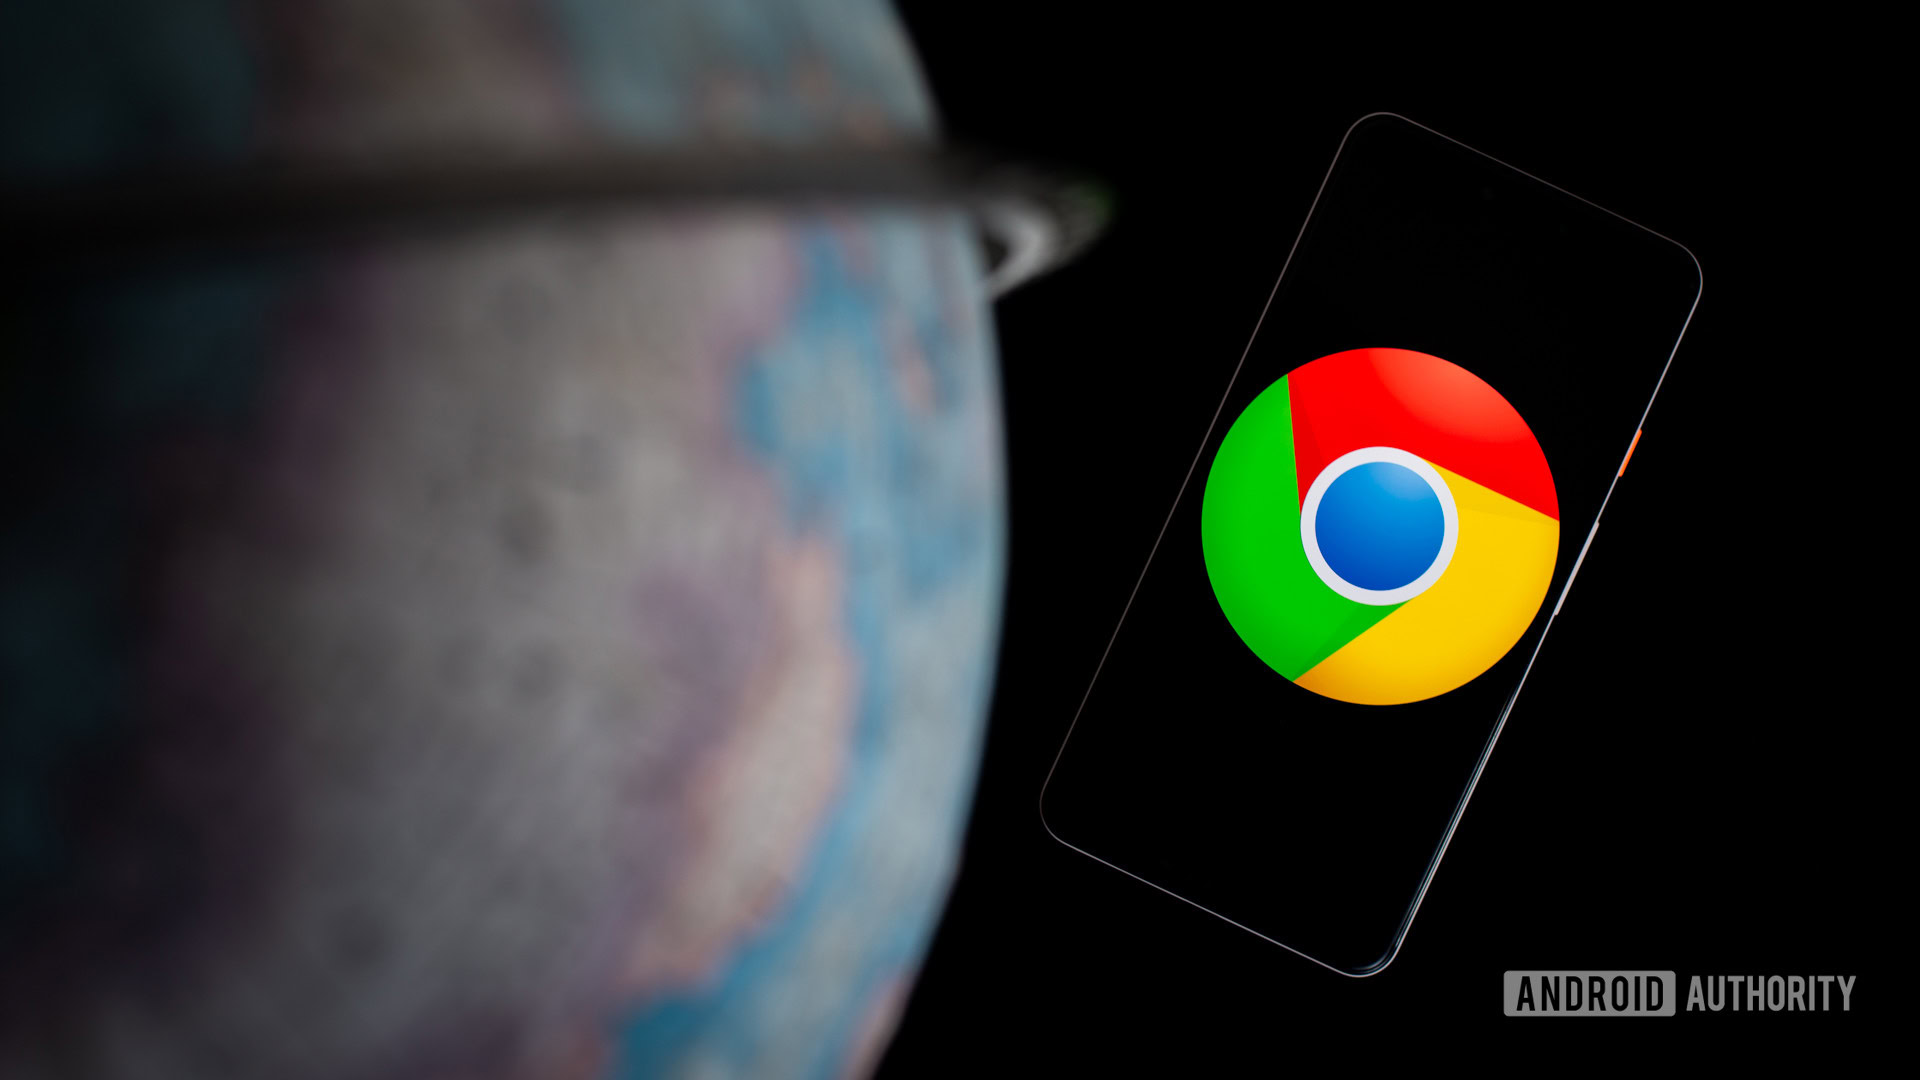 New Google Chrome safety features on the way - Android Authority